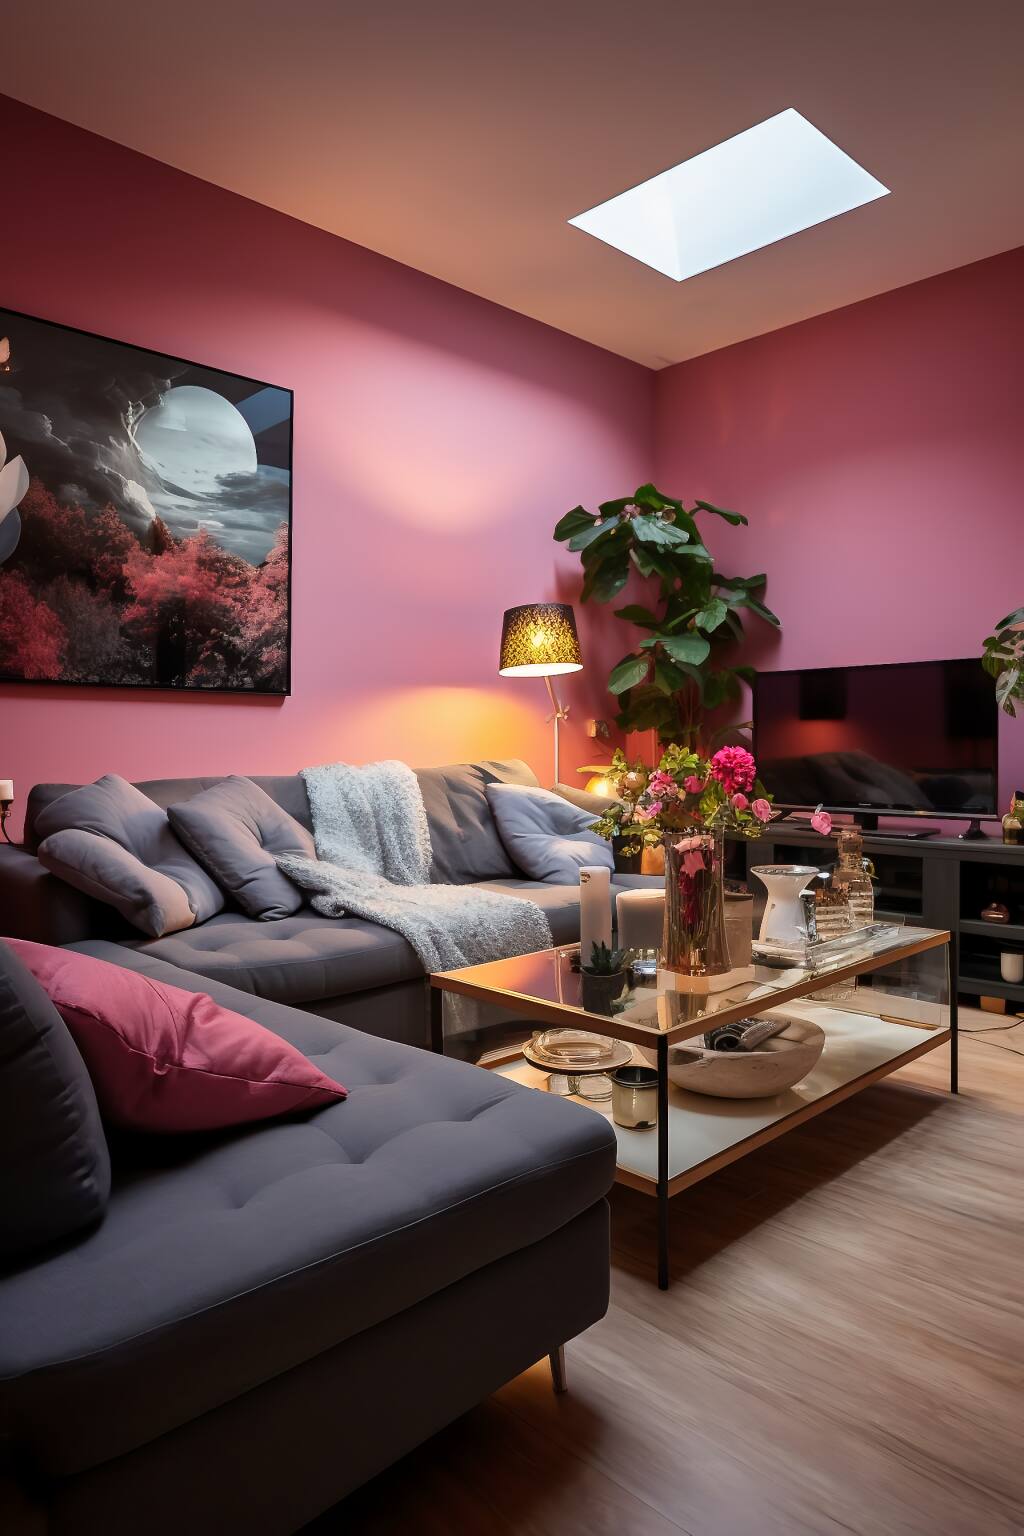 A Modern Living Room With Pink Walls And Ceiling, Featuring A Grey Sectional Sofa, Glass Coffee Table, And Indoor Plants.